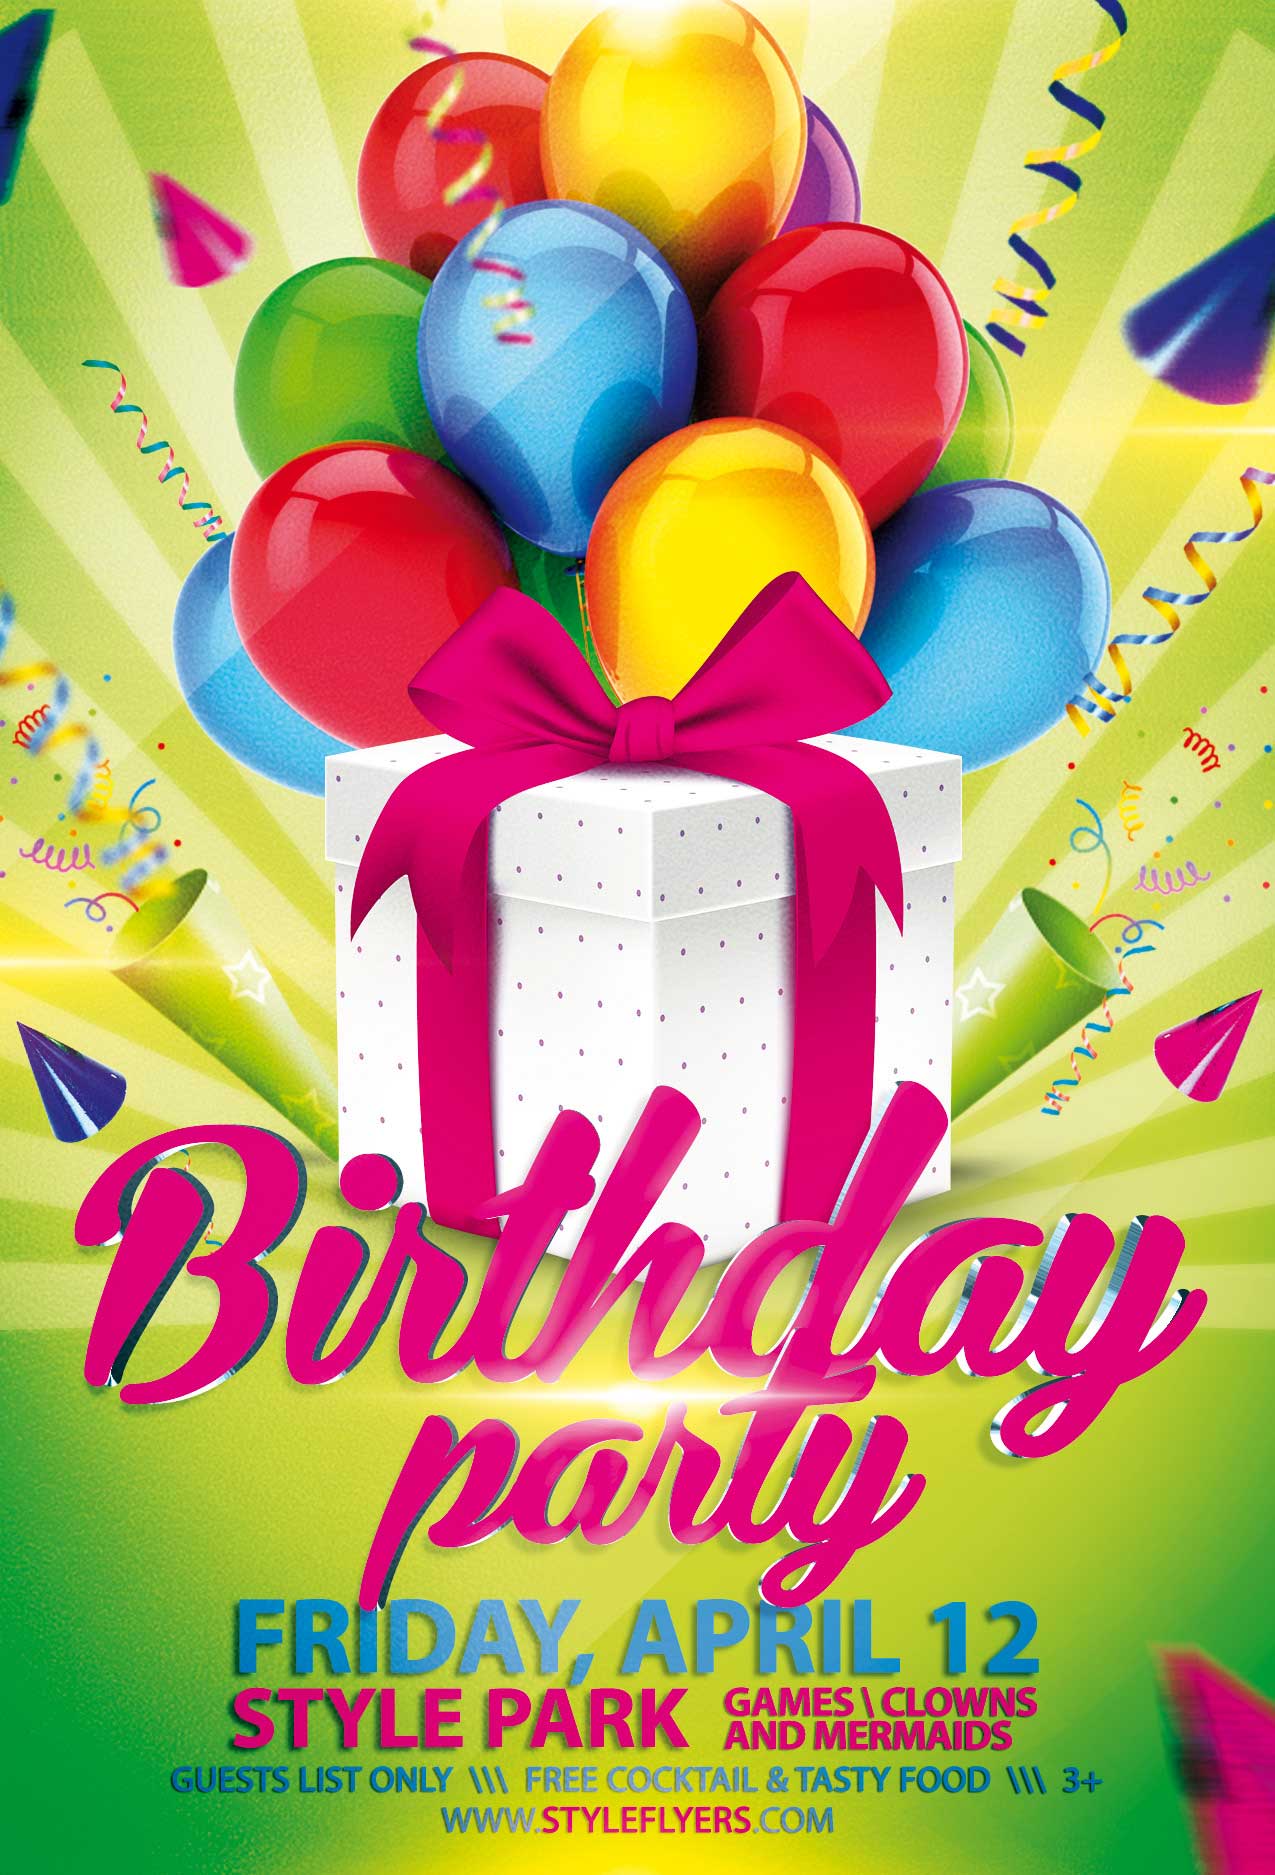 Birthday Party PSD Flyer Template with animated fully editable invitation  #7319 - Styleflyers